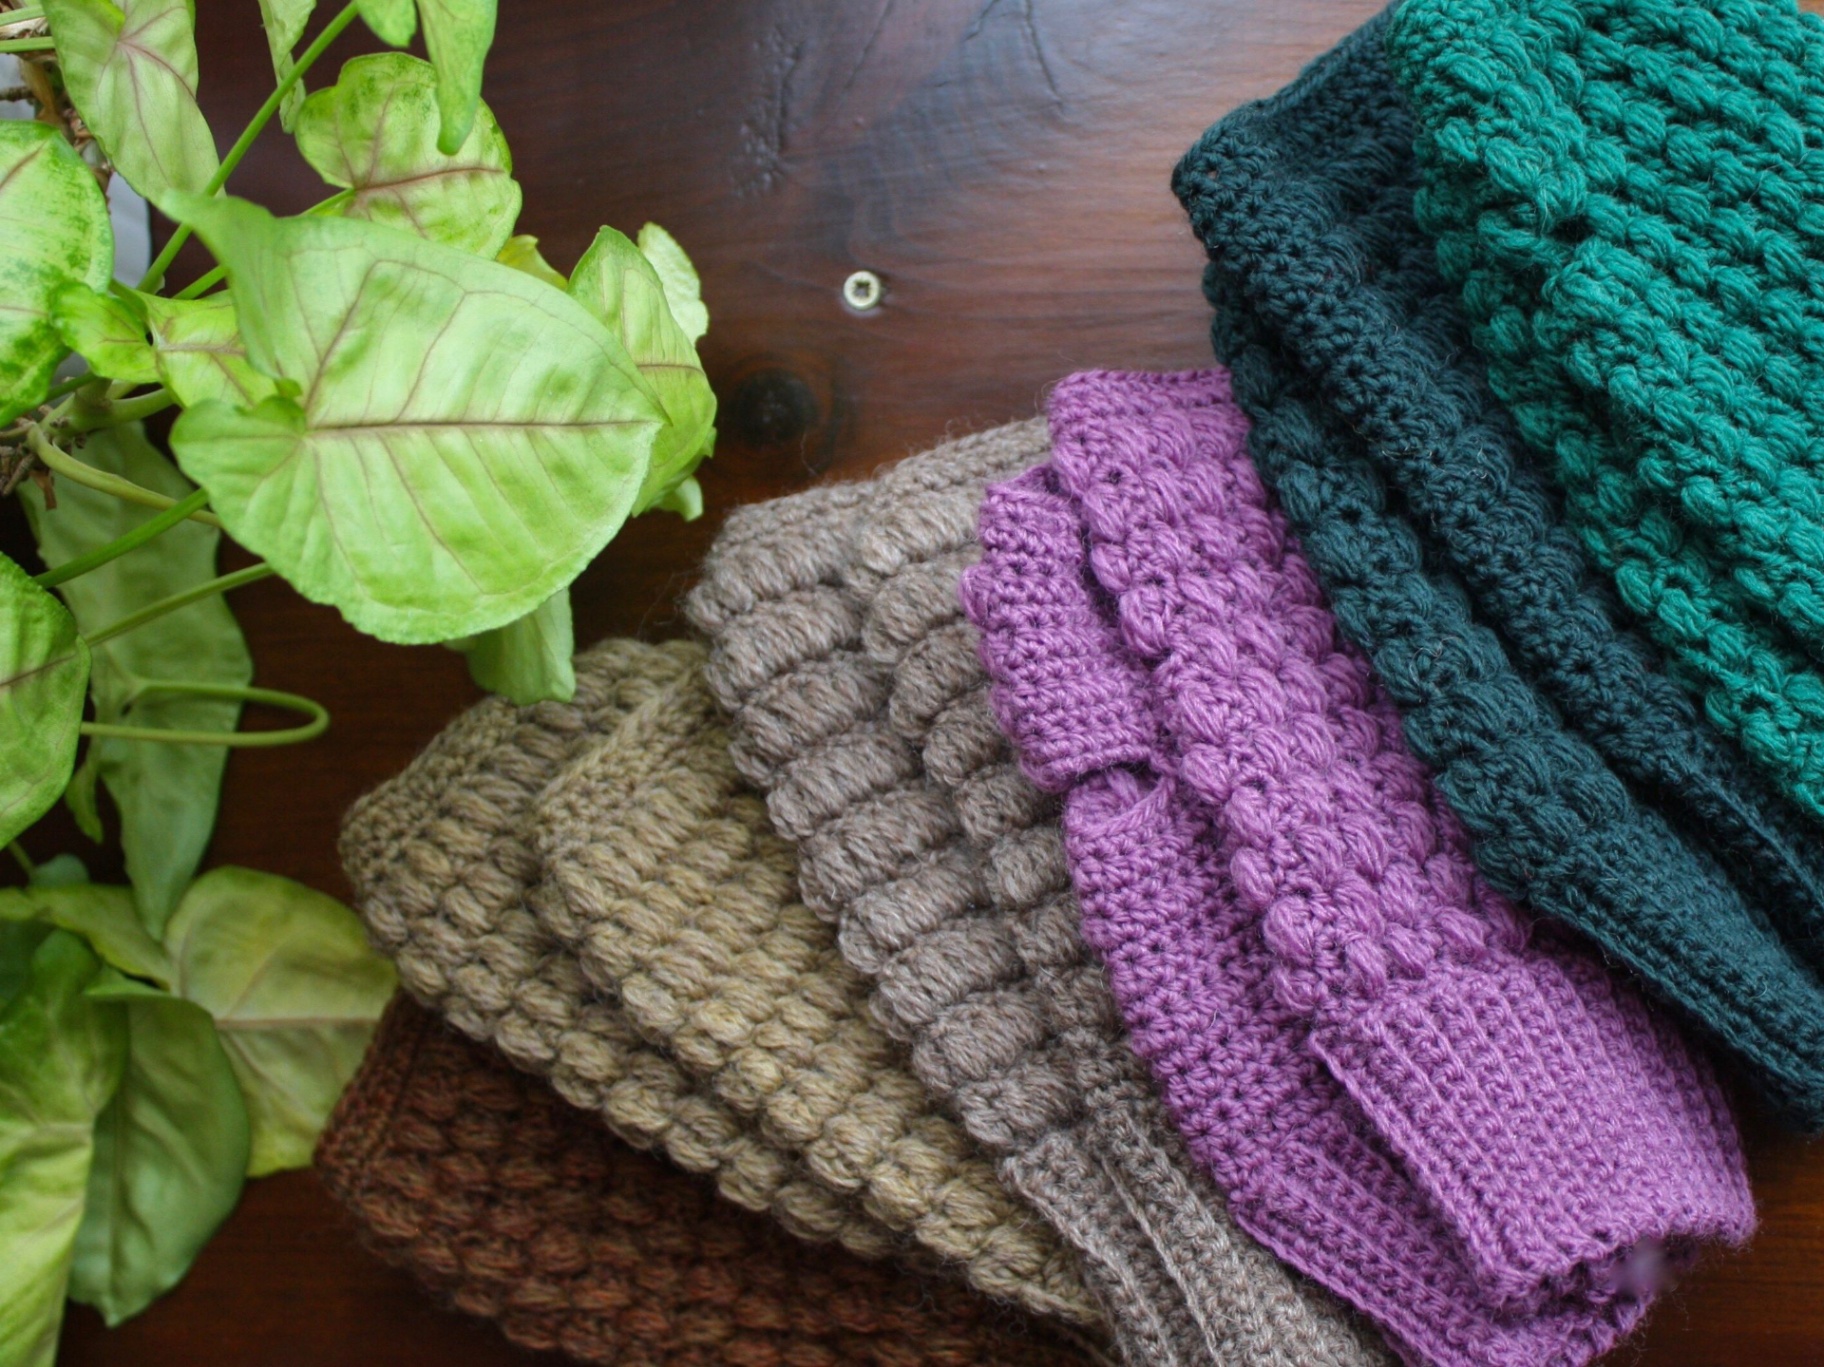 Thinking About Giving Up on Learning How to Crochet? Now It's Easy with This New Free App